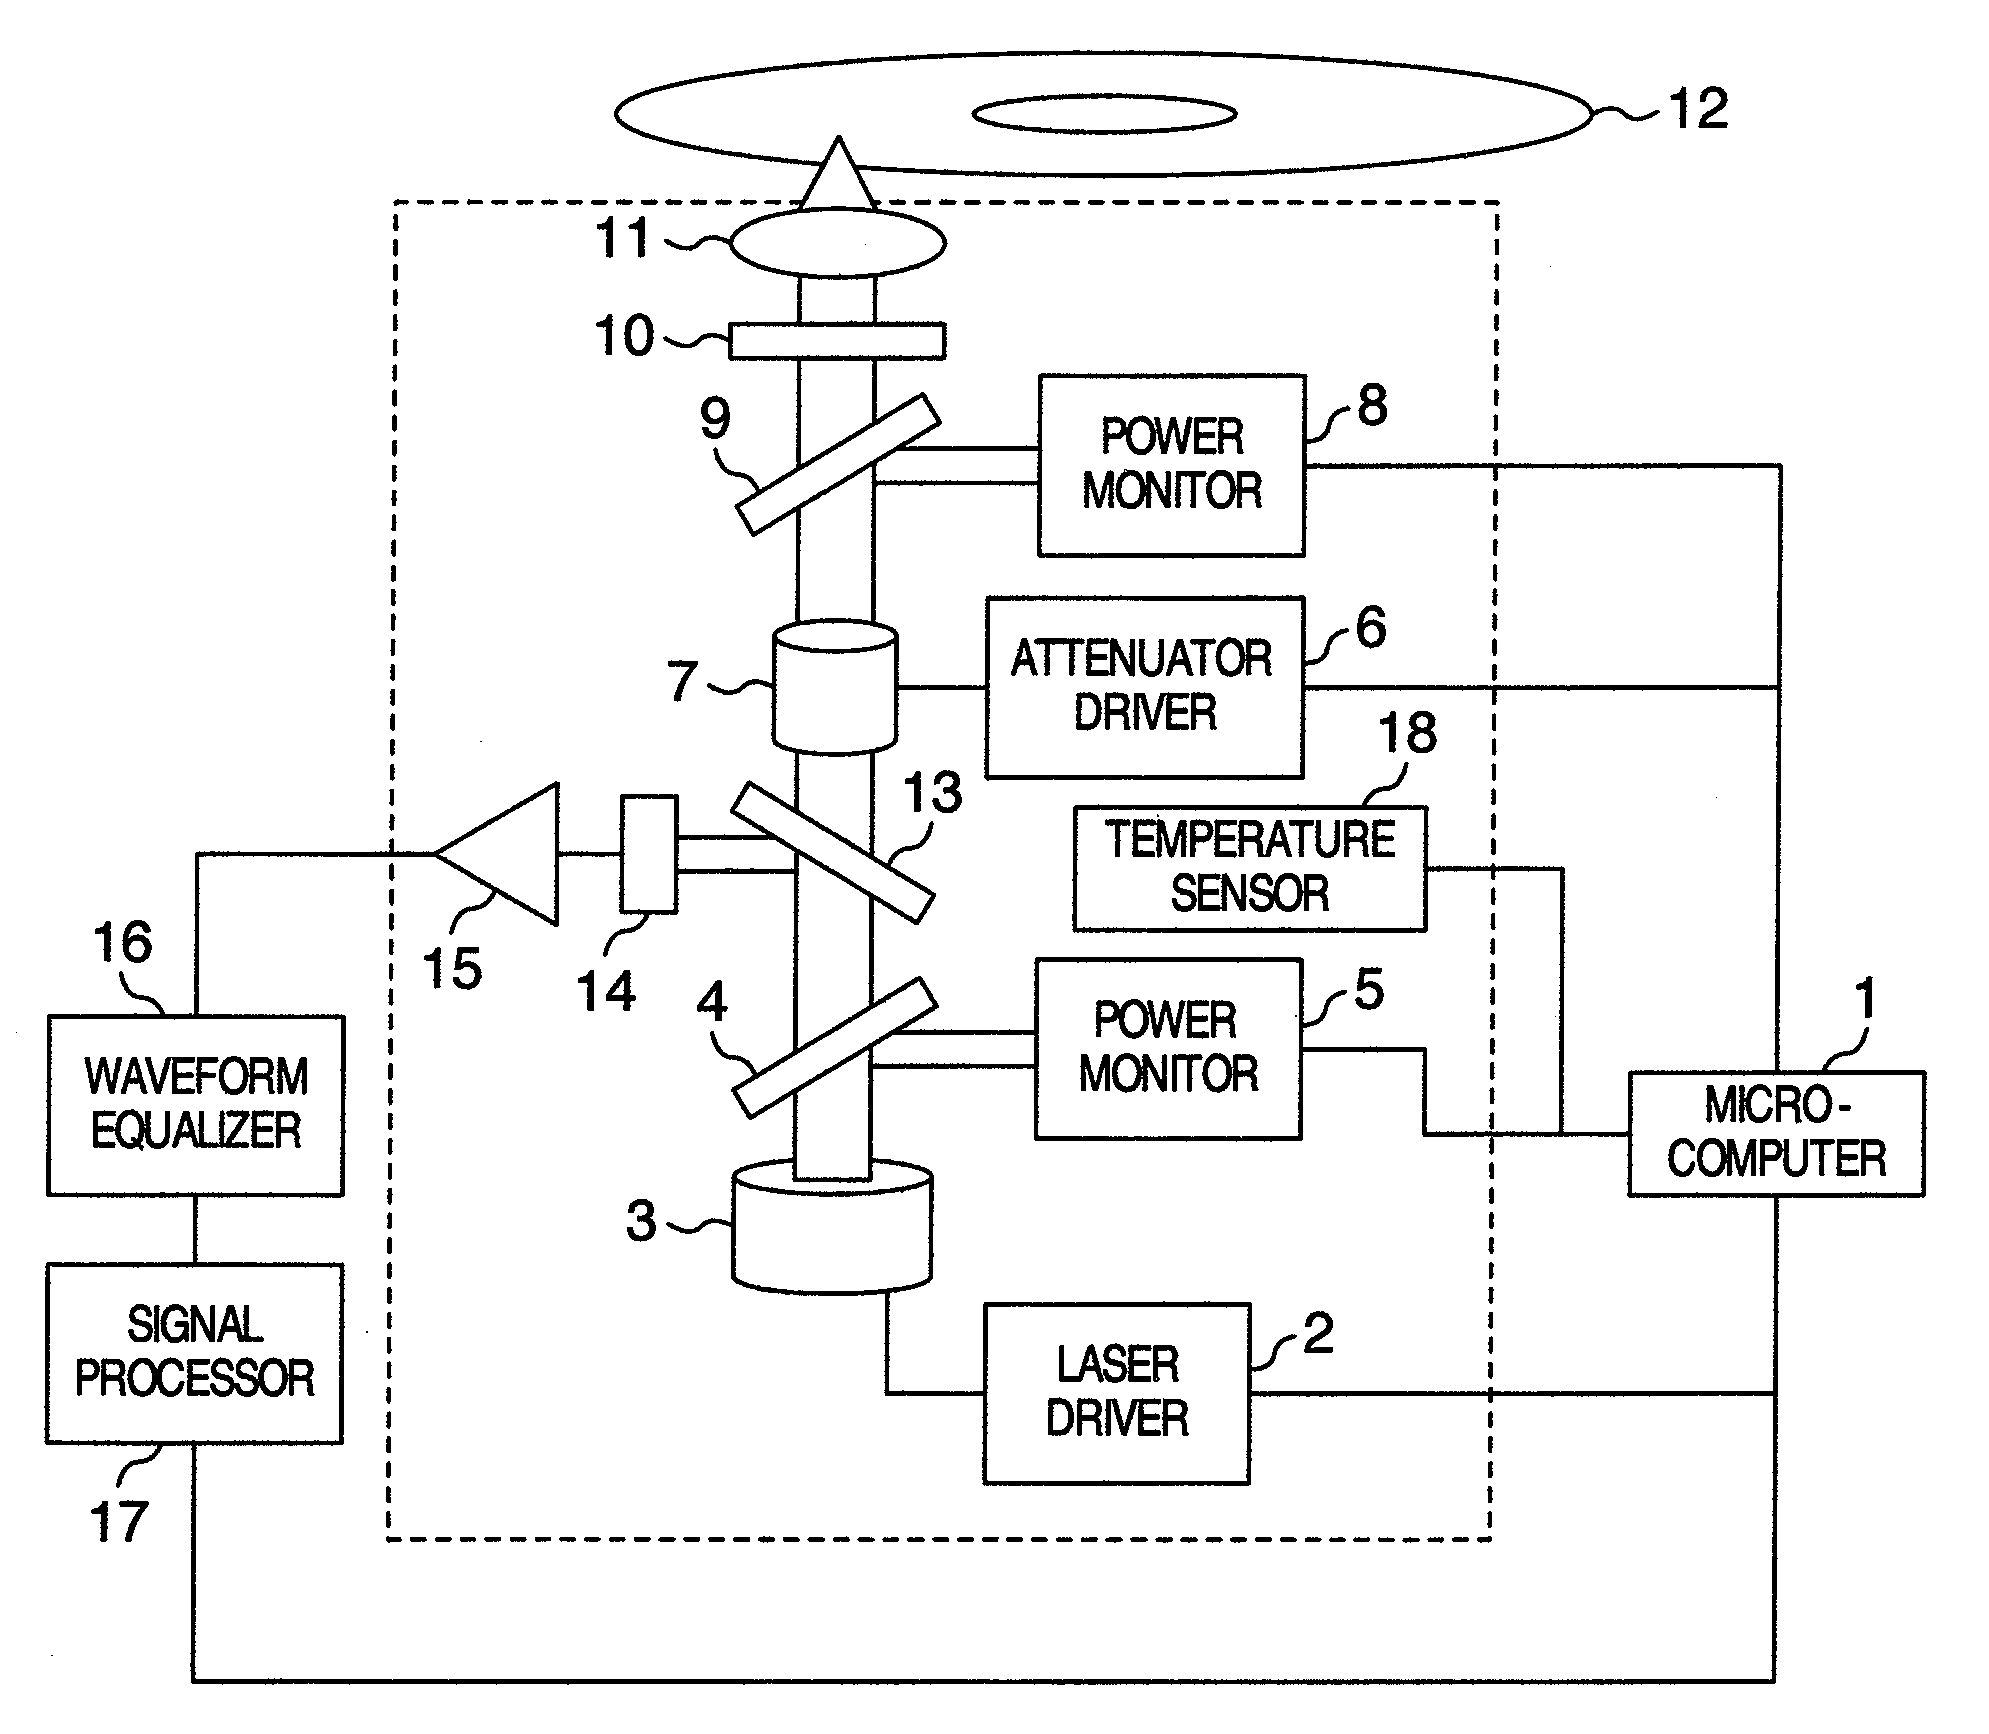 Optical disc apparatus and method for controlling the same